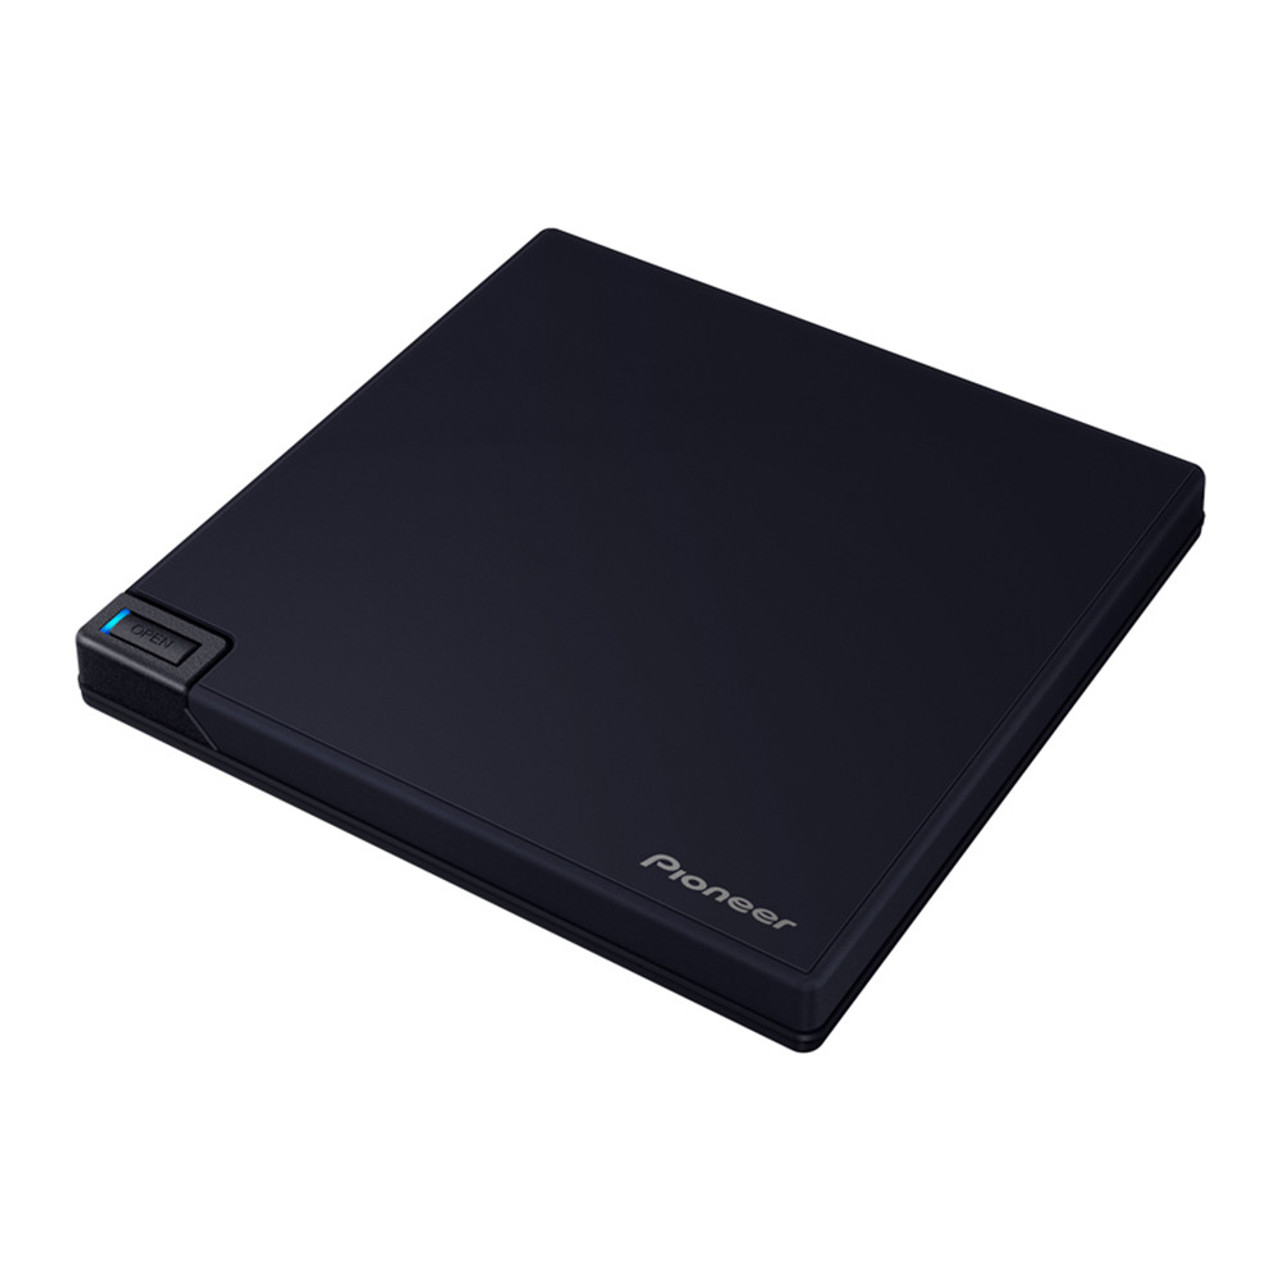 Pioneer BDR-XD08UMB-S Portable 6X Ultra HD 4K Blu-ray Burner External Drive  Bundle with Cyberlink Software Download Installation Code and USB Cable -  Burns CD DVD BD DL BDXL Discs 